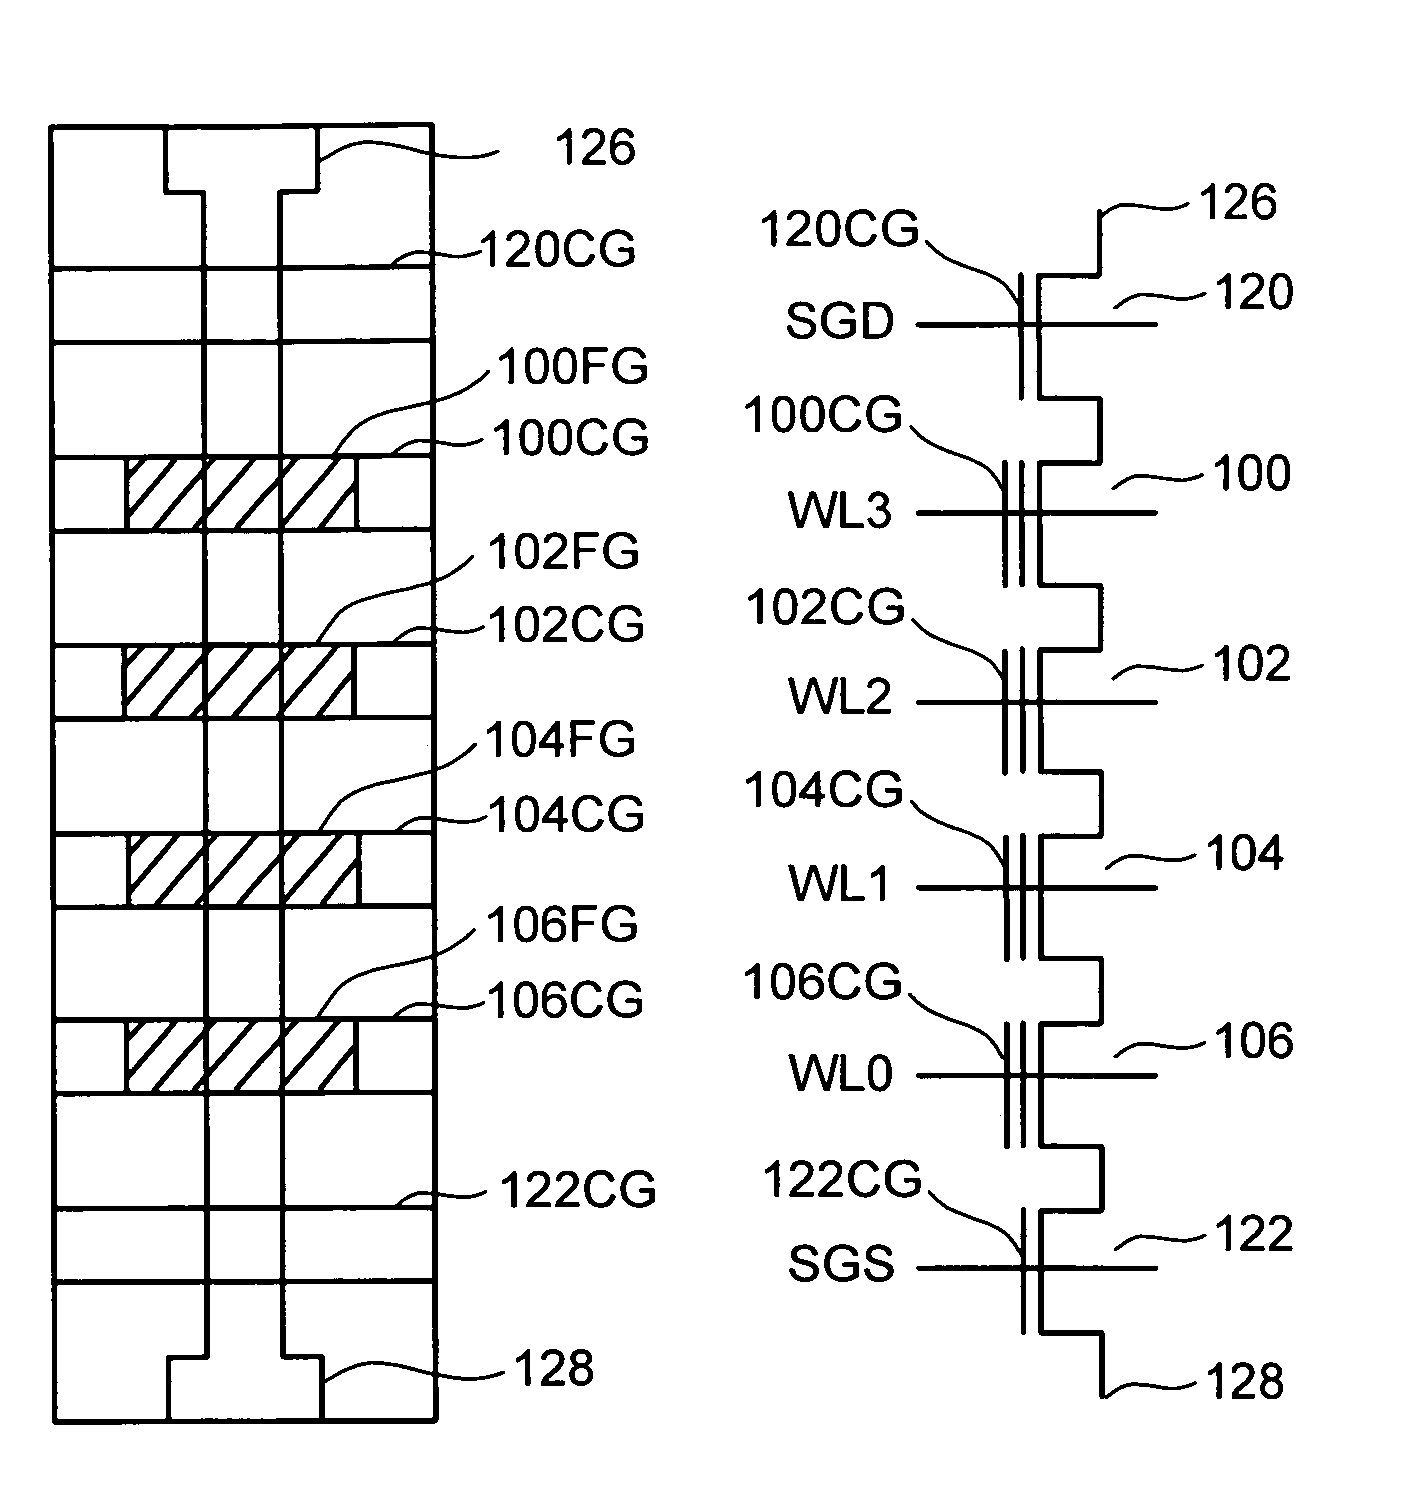 Reverse coupling effect with timing information for non-volatile memory